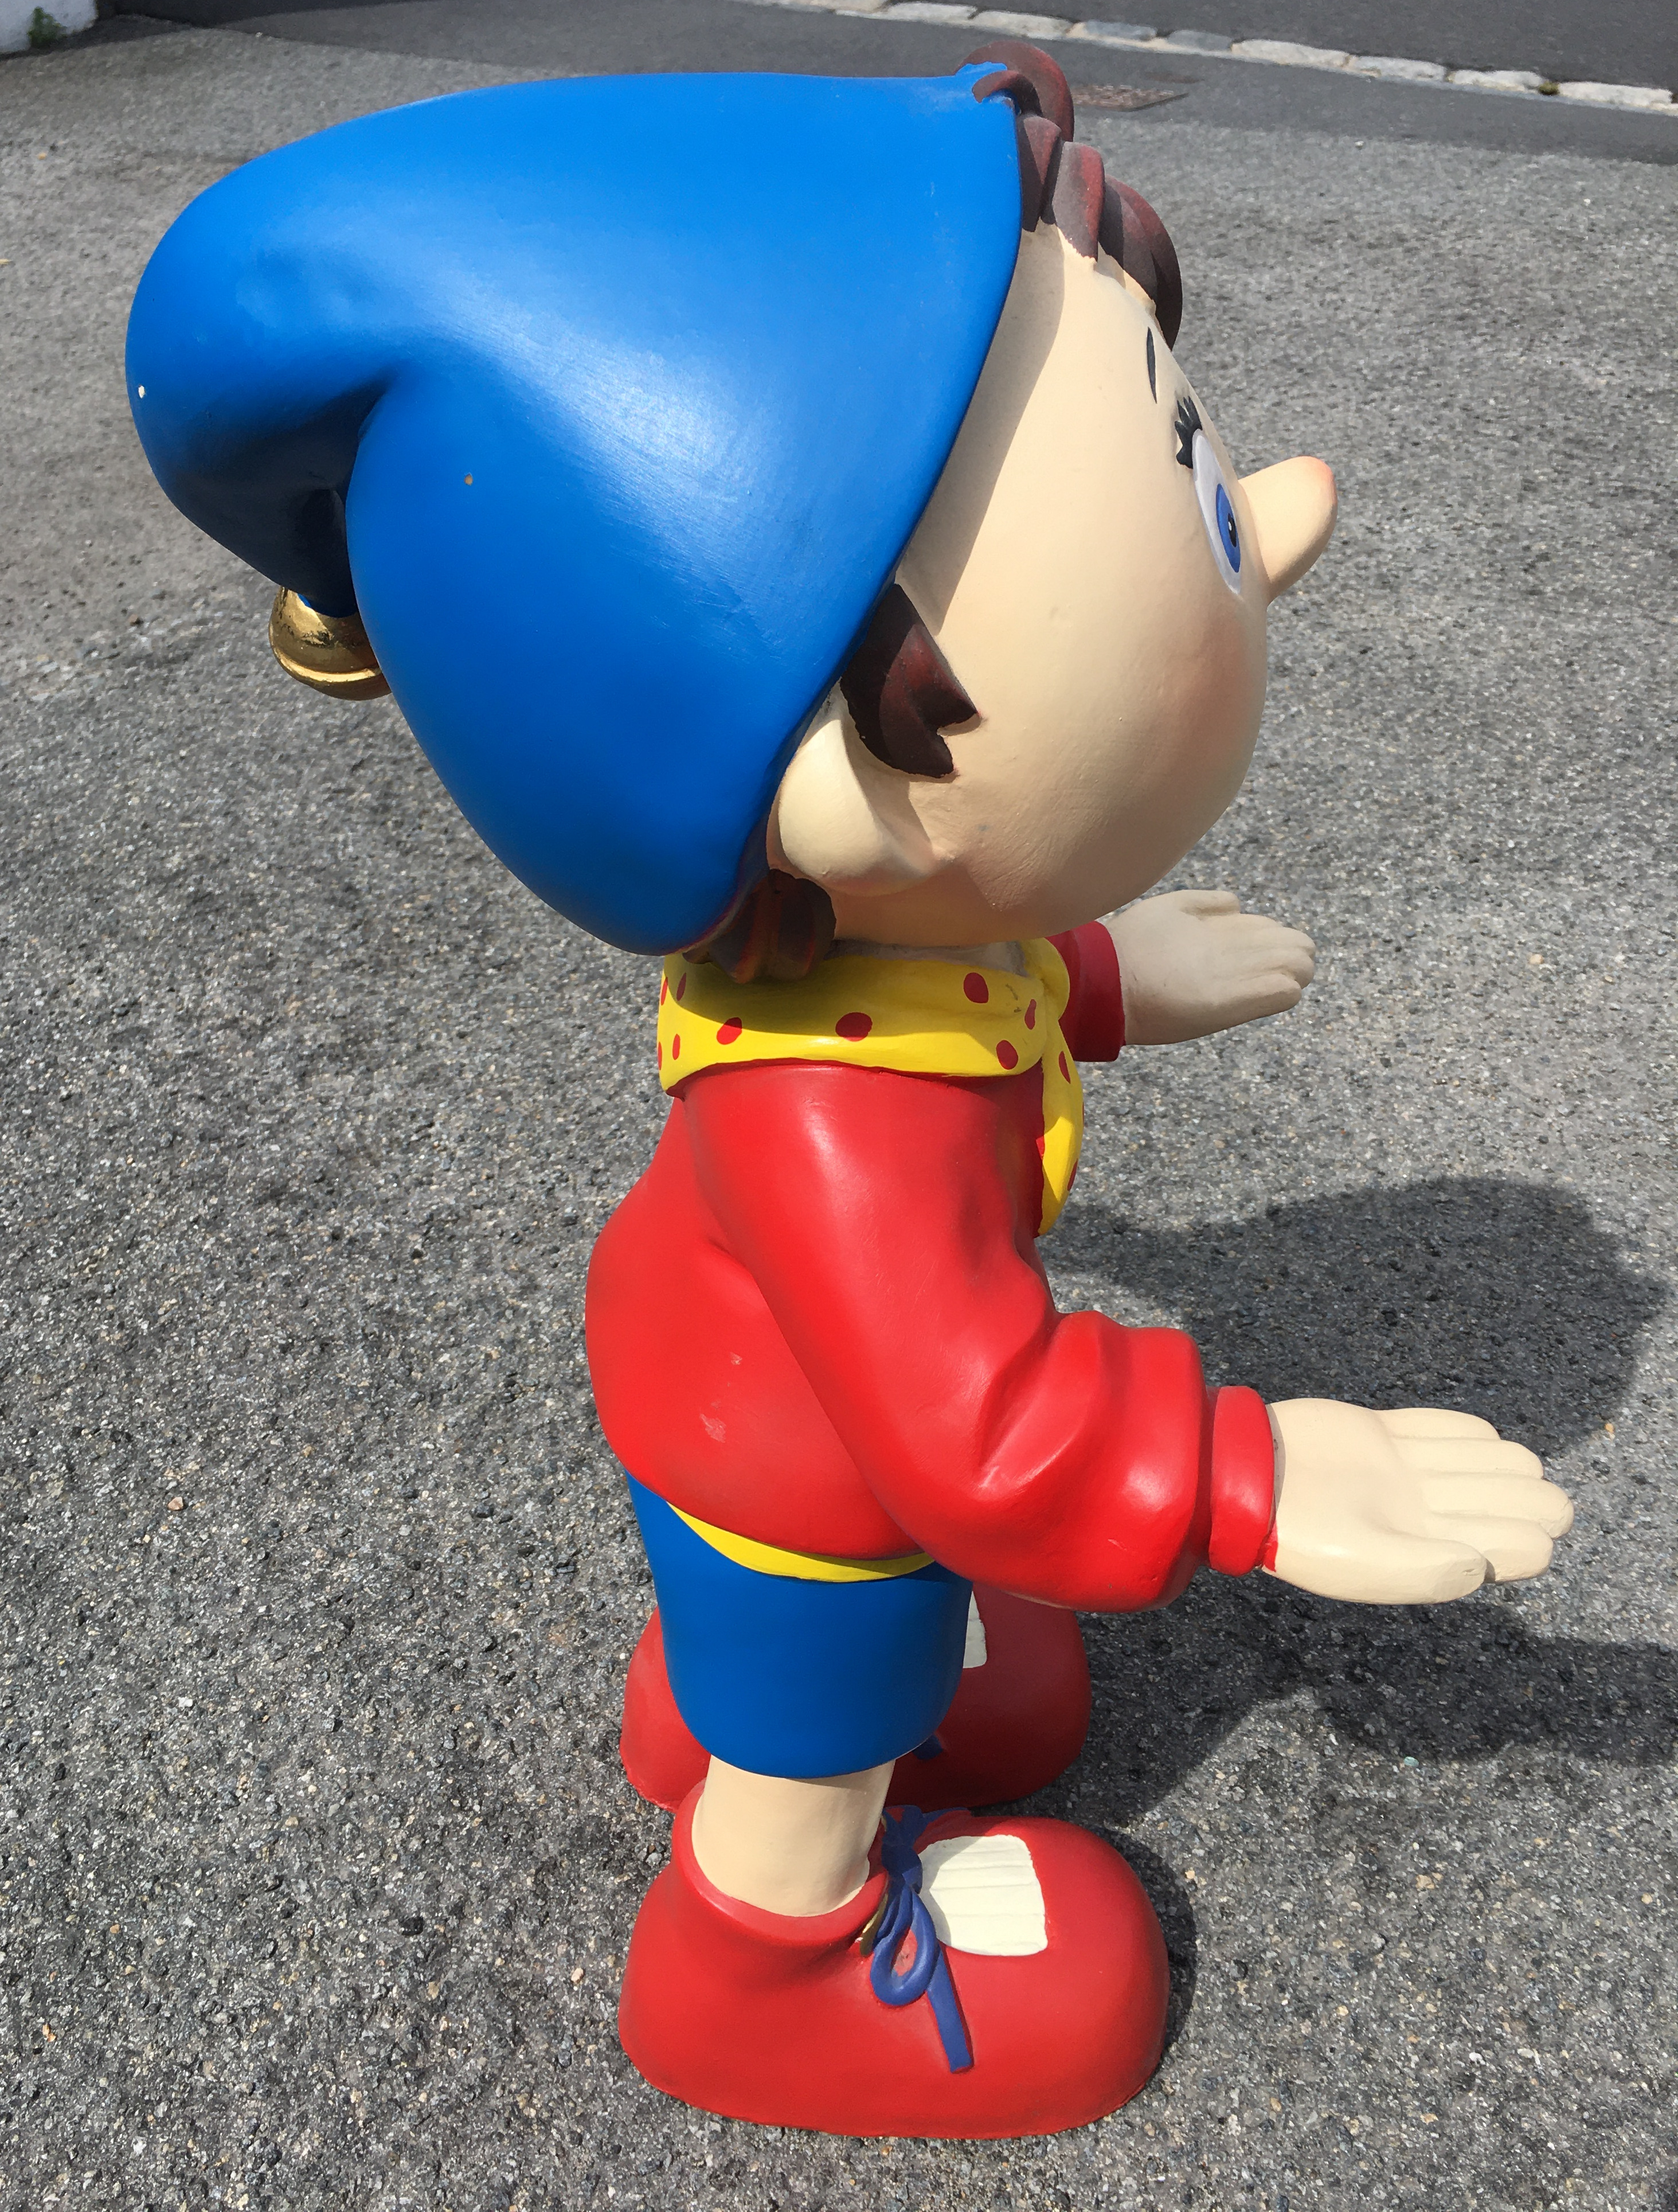 A vintage Noddy shop display figure, in fibreglass, standing 24in. (61cm.) high. - Image 4 of 5